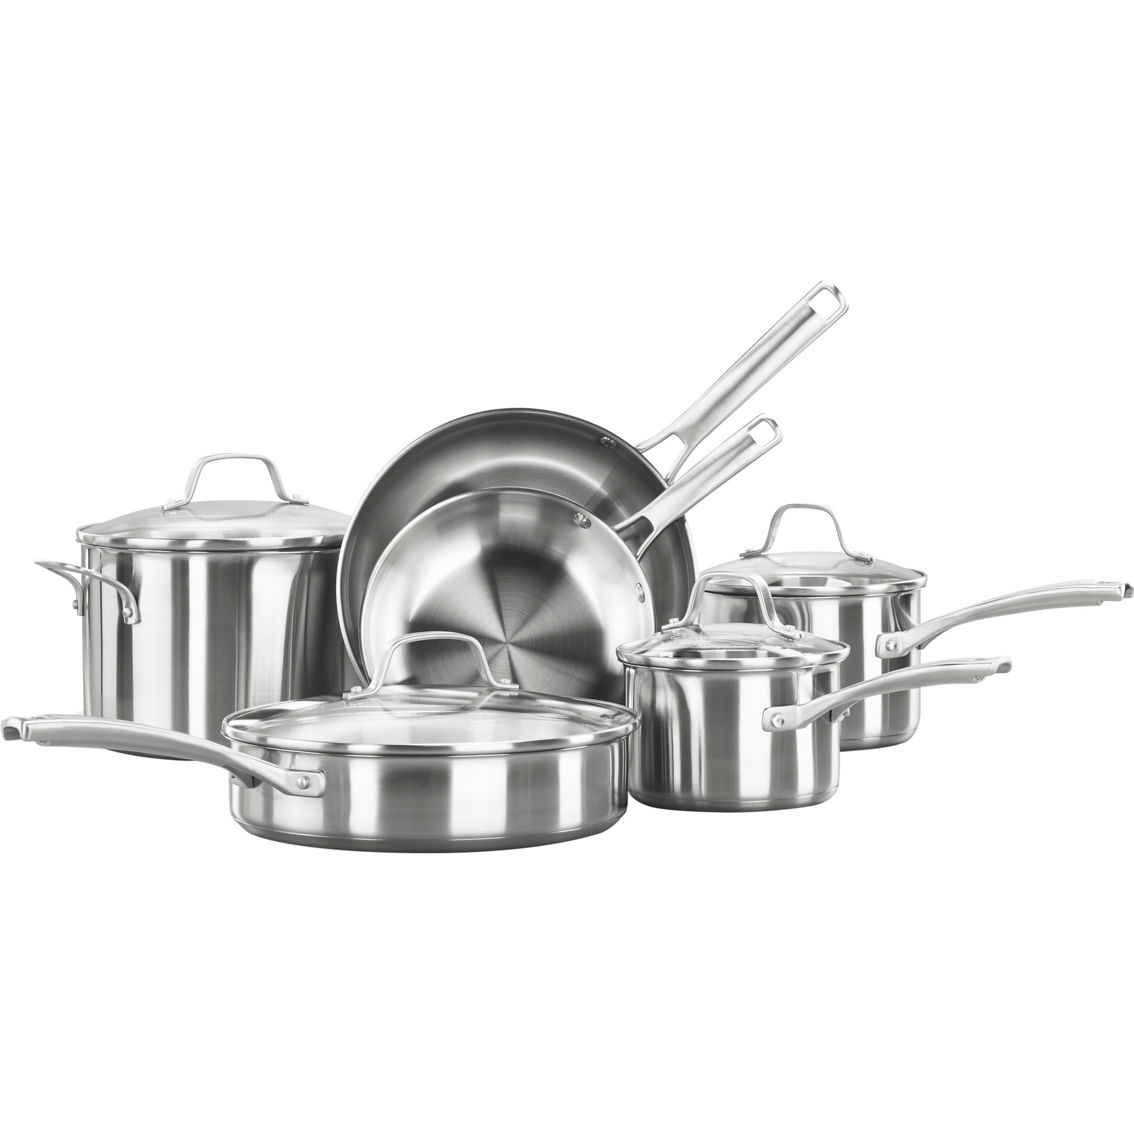 Calphalon Classic Stainless Steel 10 Pc. Cookware Set